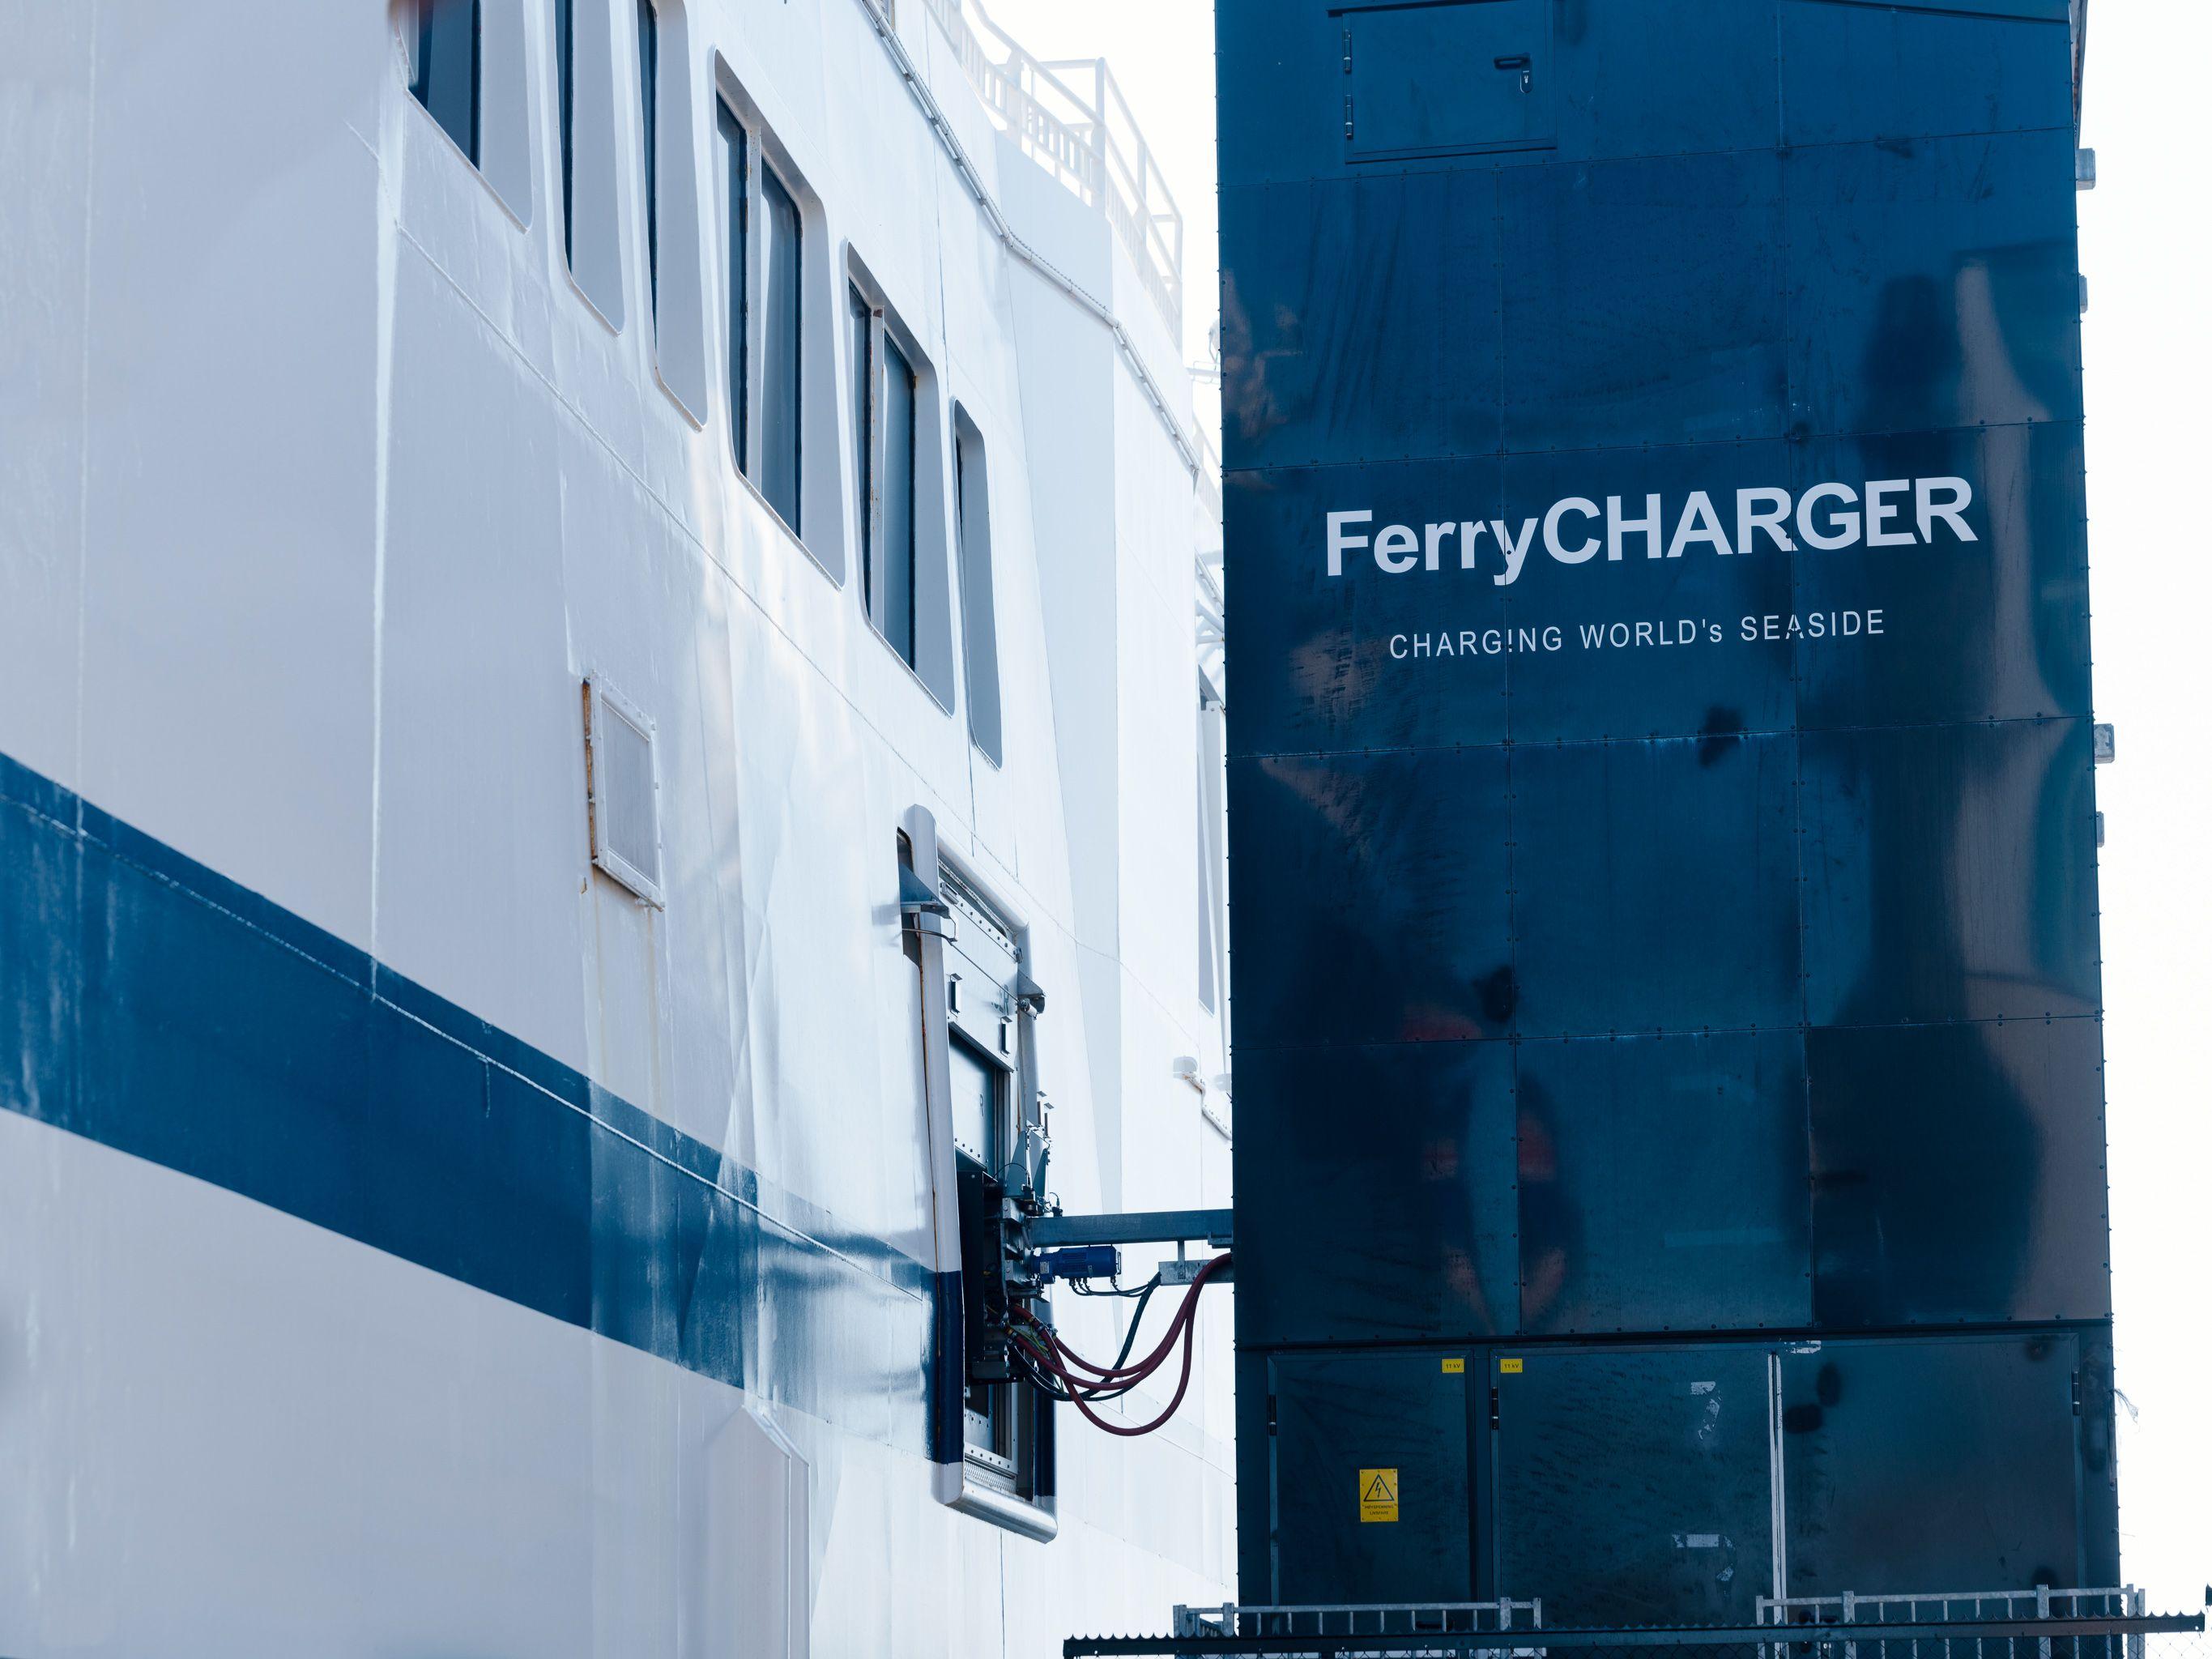 A ferry charger charging a ferry